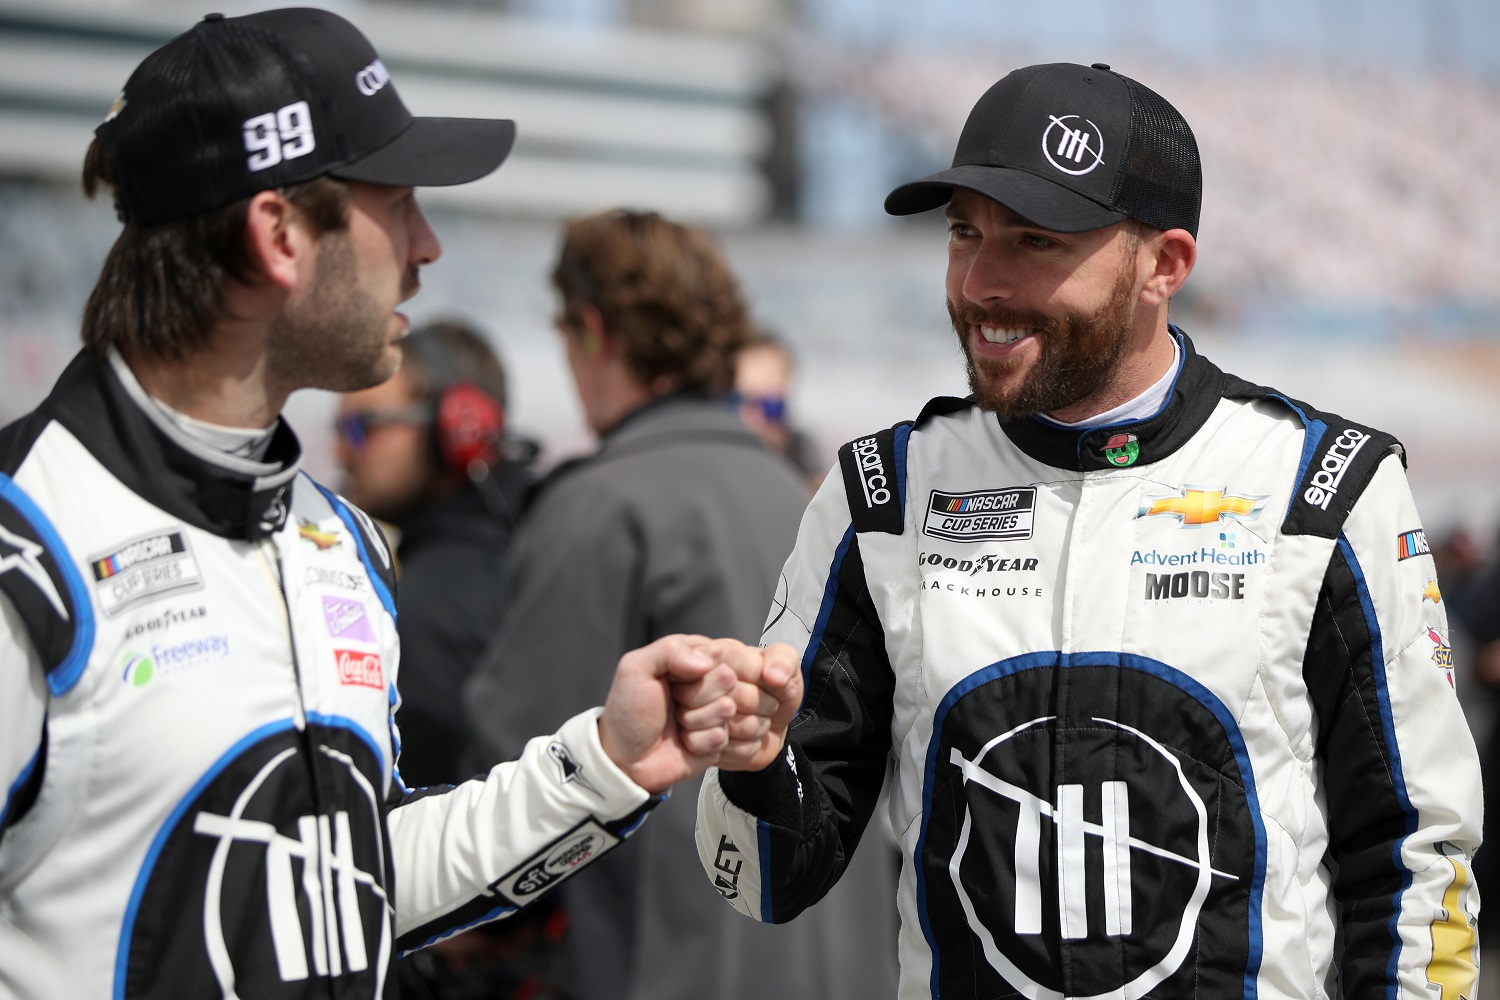 Trackhouse Racing teammates Ross Chastain, driver of the No. 1 Chevrolet, and Daniel Suarez, driver of the No. 99 Chevrolet, bump fists during qualifying for the NASCAR Cup Series Pennzoil 400 at Las Vegas Motor Speedway on March 5, 2022.